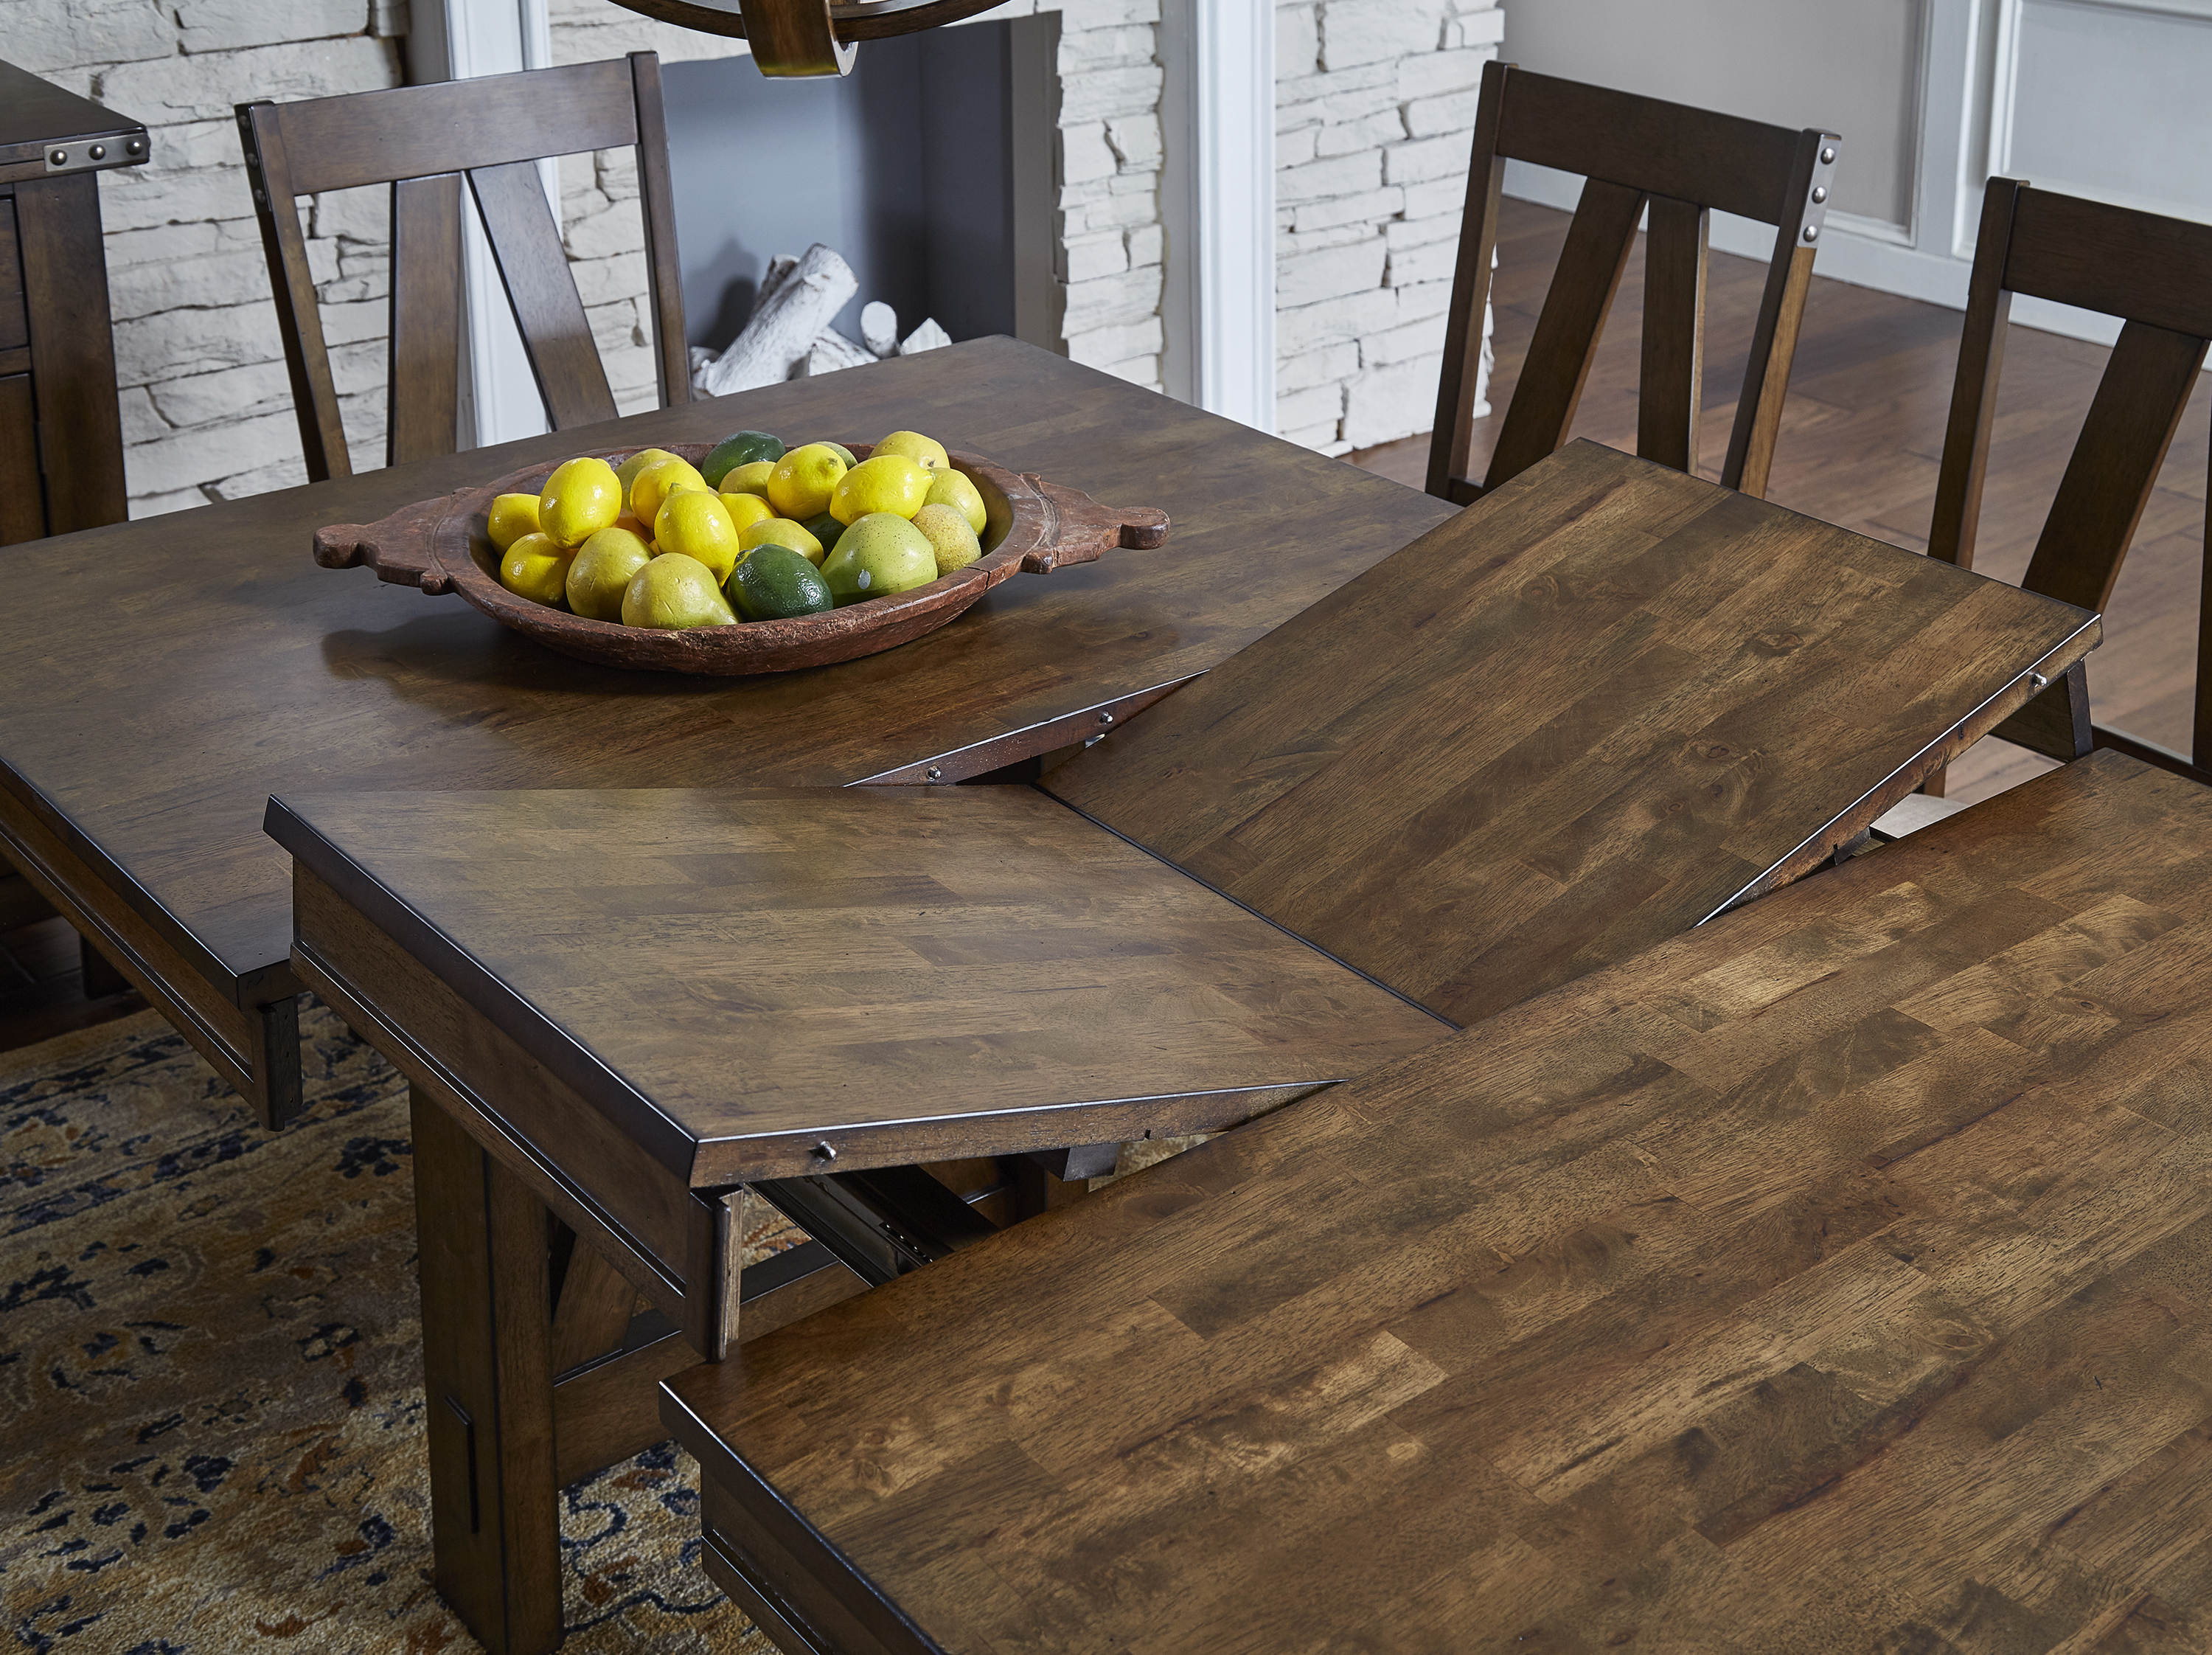 A History Of Table Leaves Part Ii, How To Make A Dining Room Table With Leaves